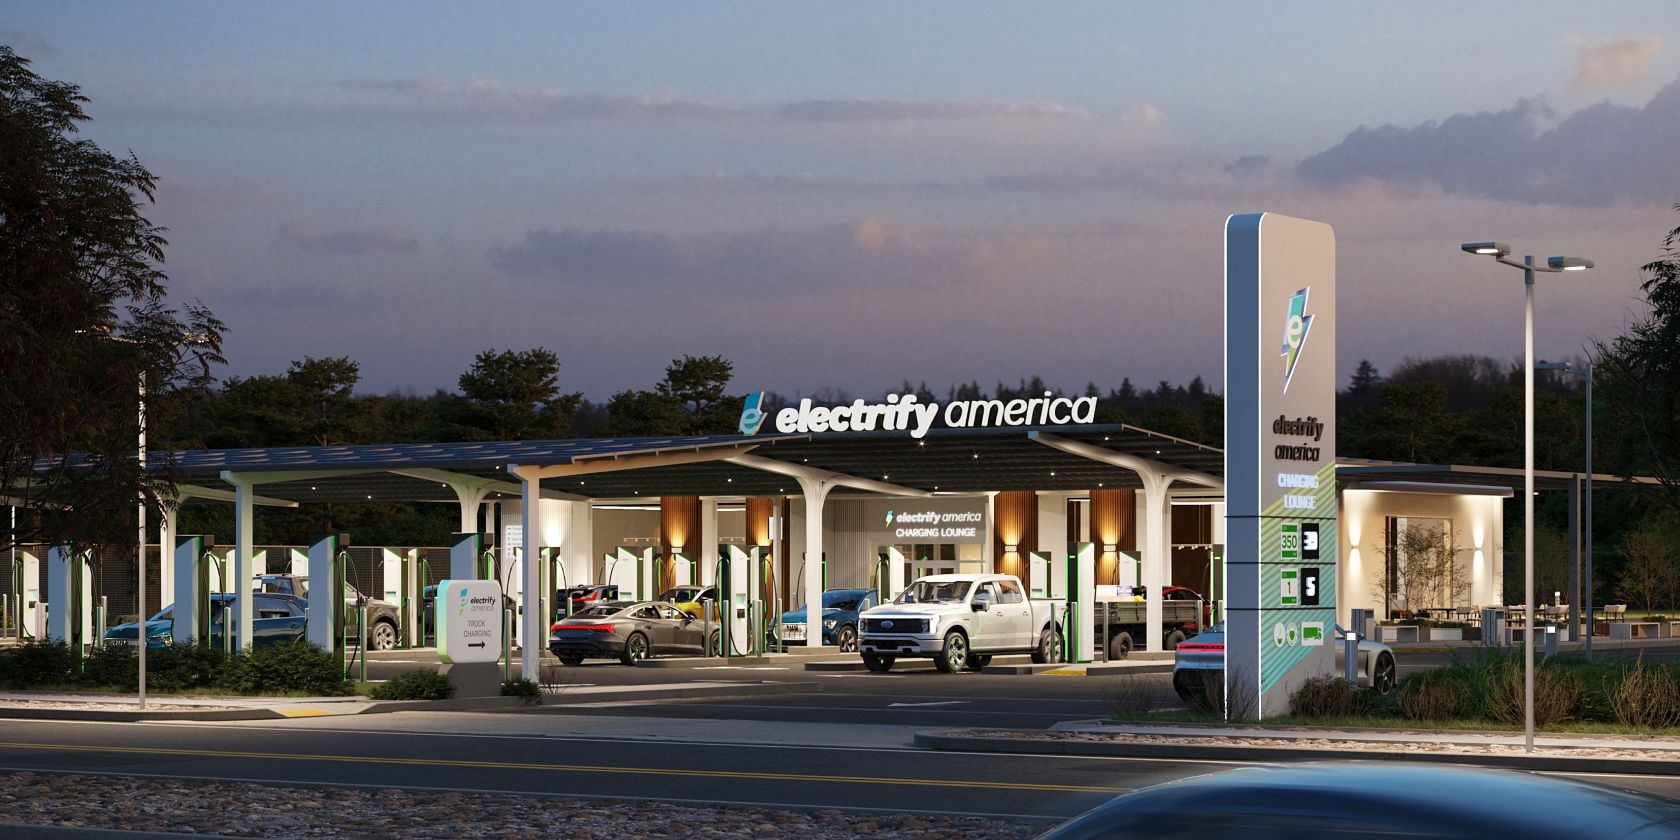 electrify America's future electric vehicle EV charging station